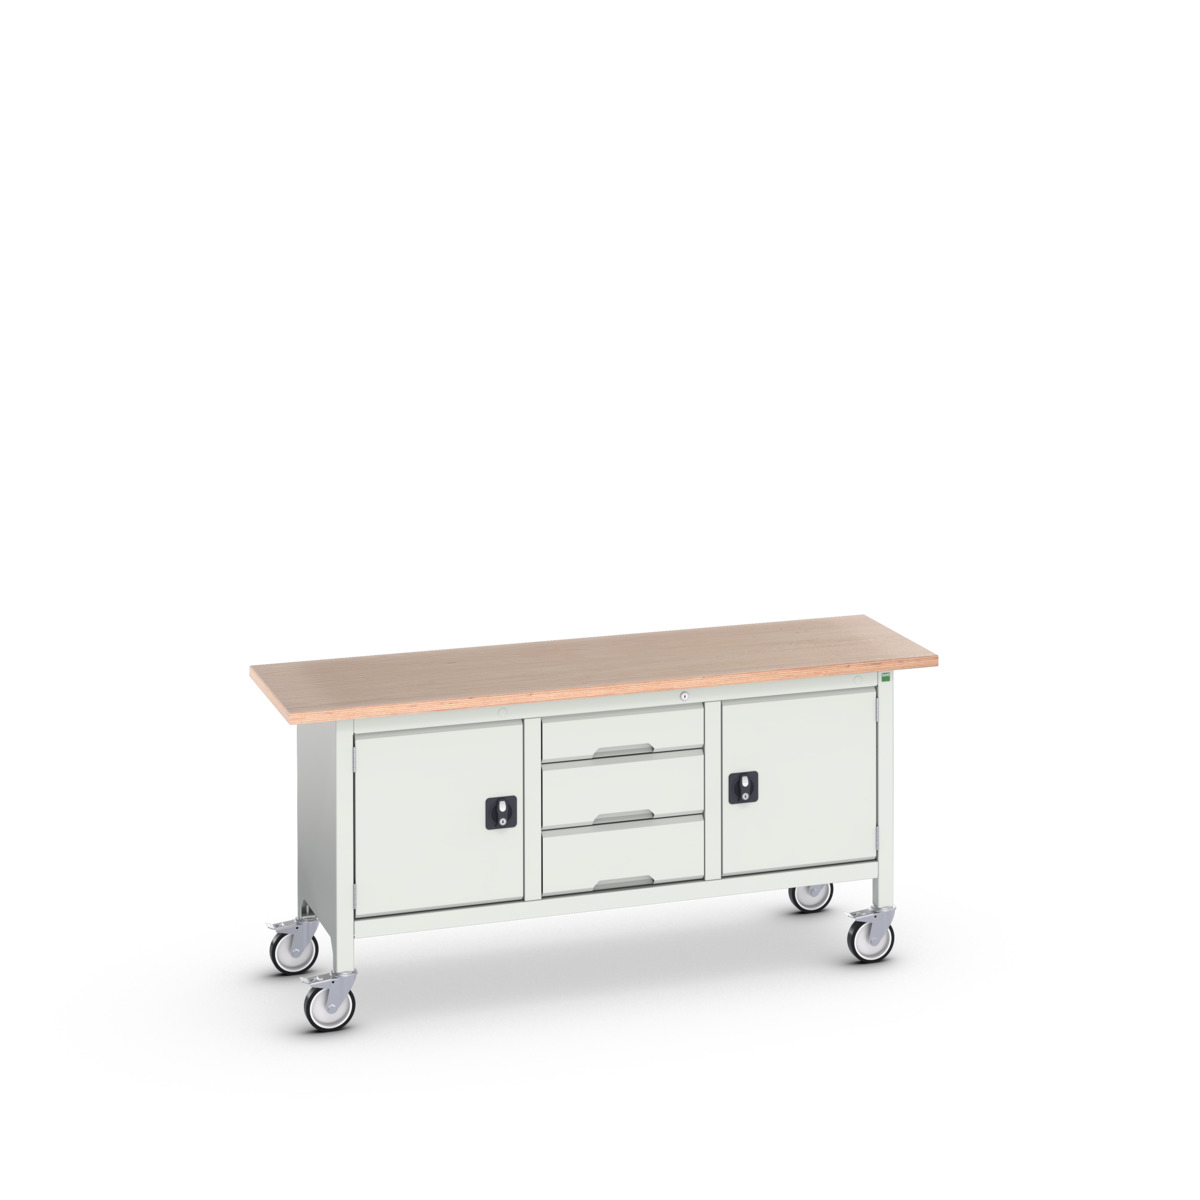 16923222.16 - verso mobile storage bench (mpx)